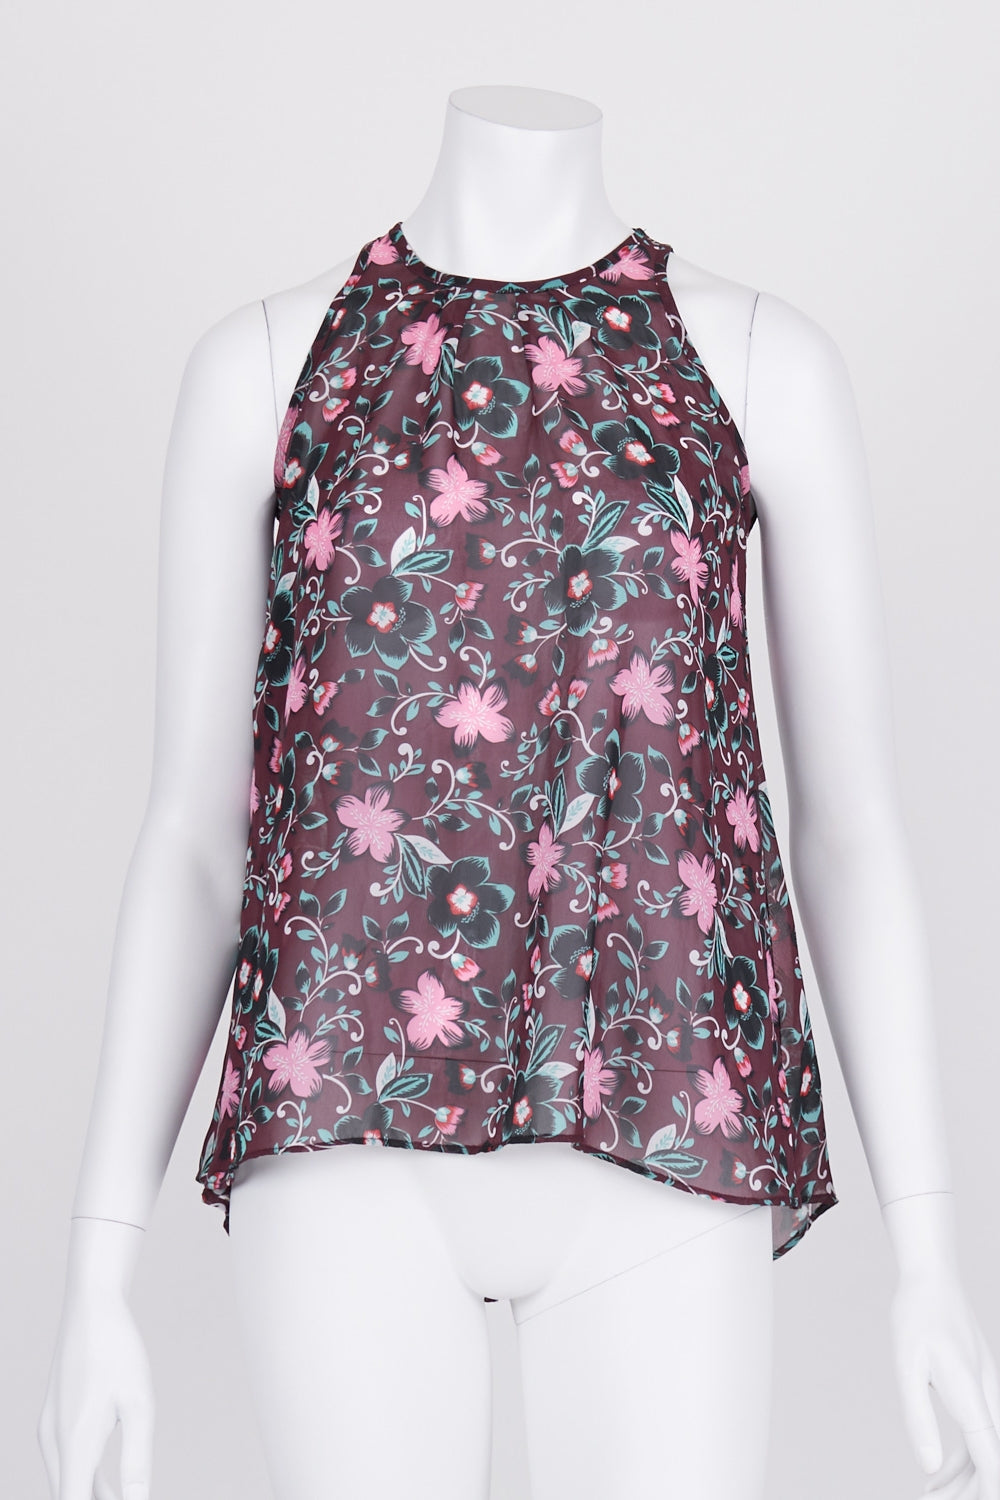 Cue Floral Sheer Sleeveless Top 6